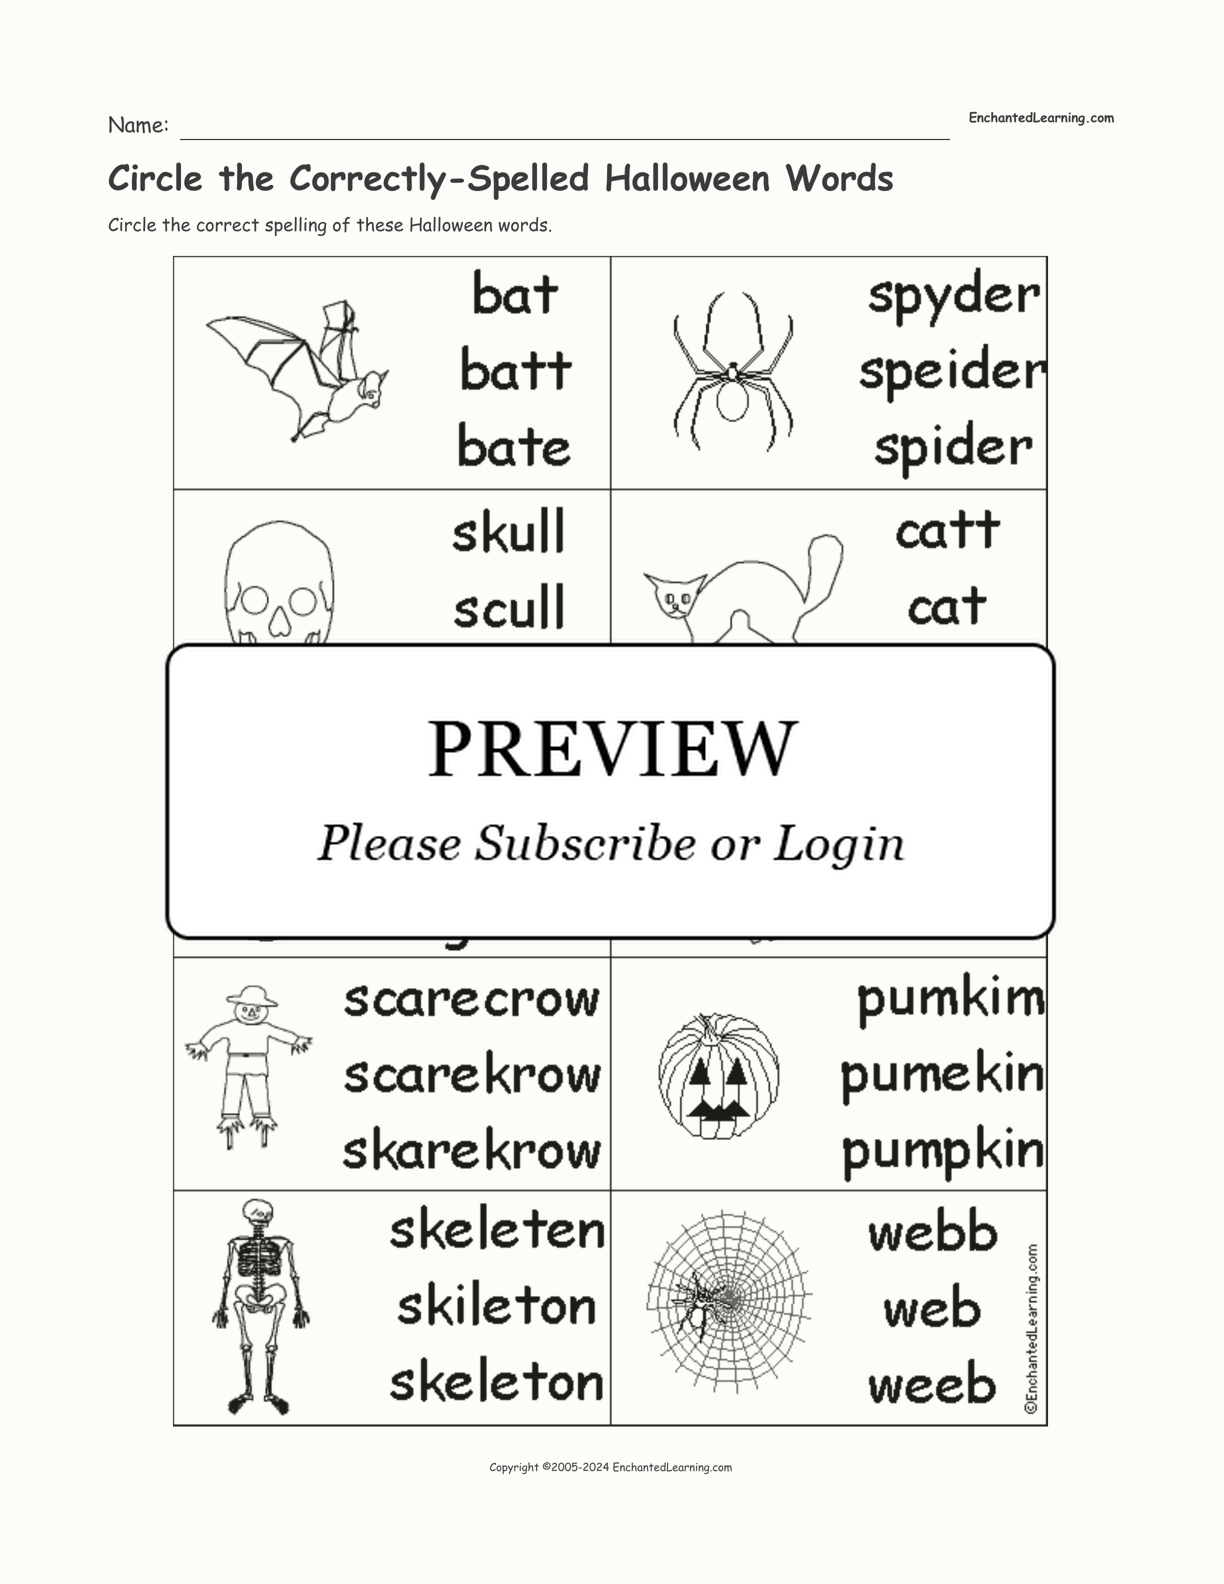 Circle the Correctly-Spelled Halloween Words interactive worksheet page 1